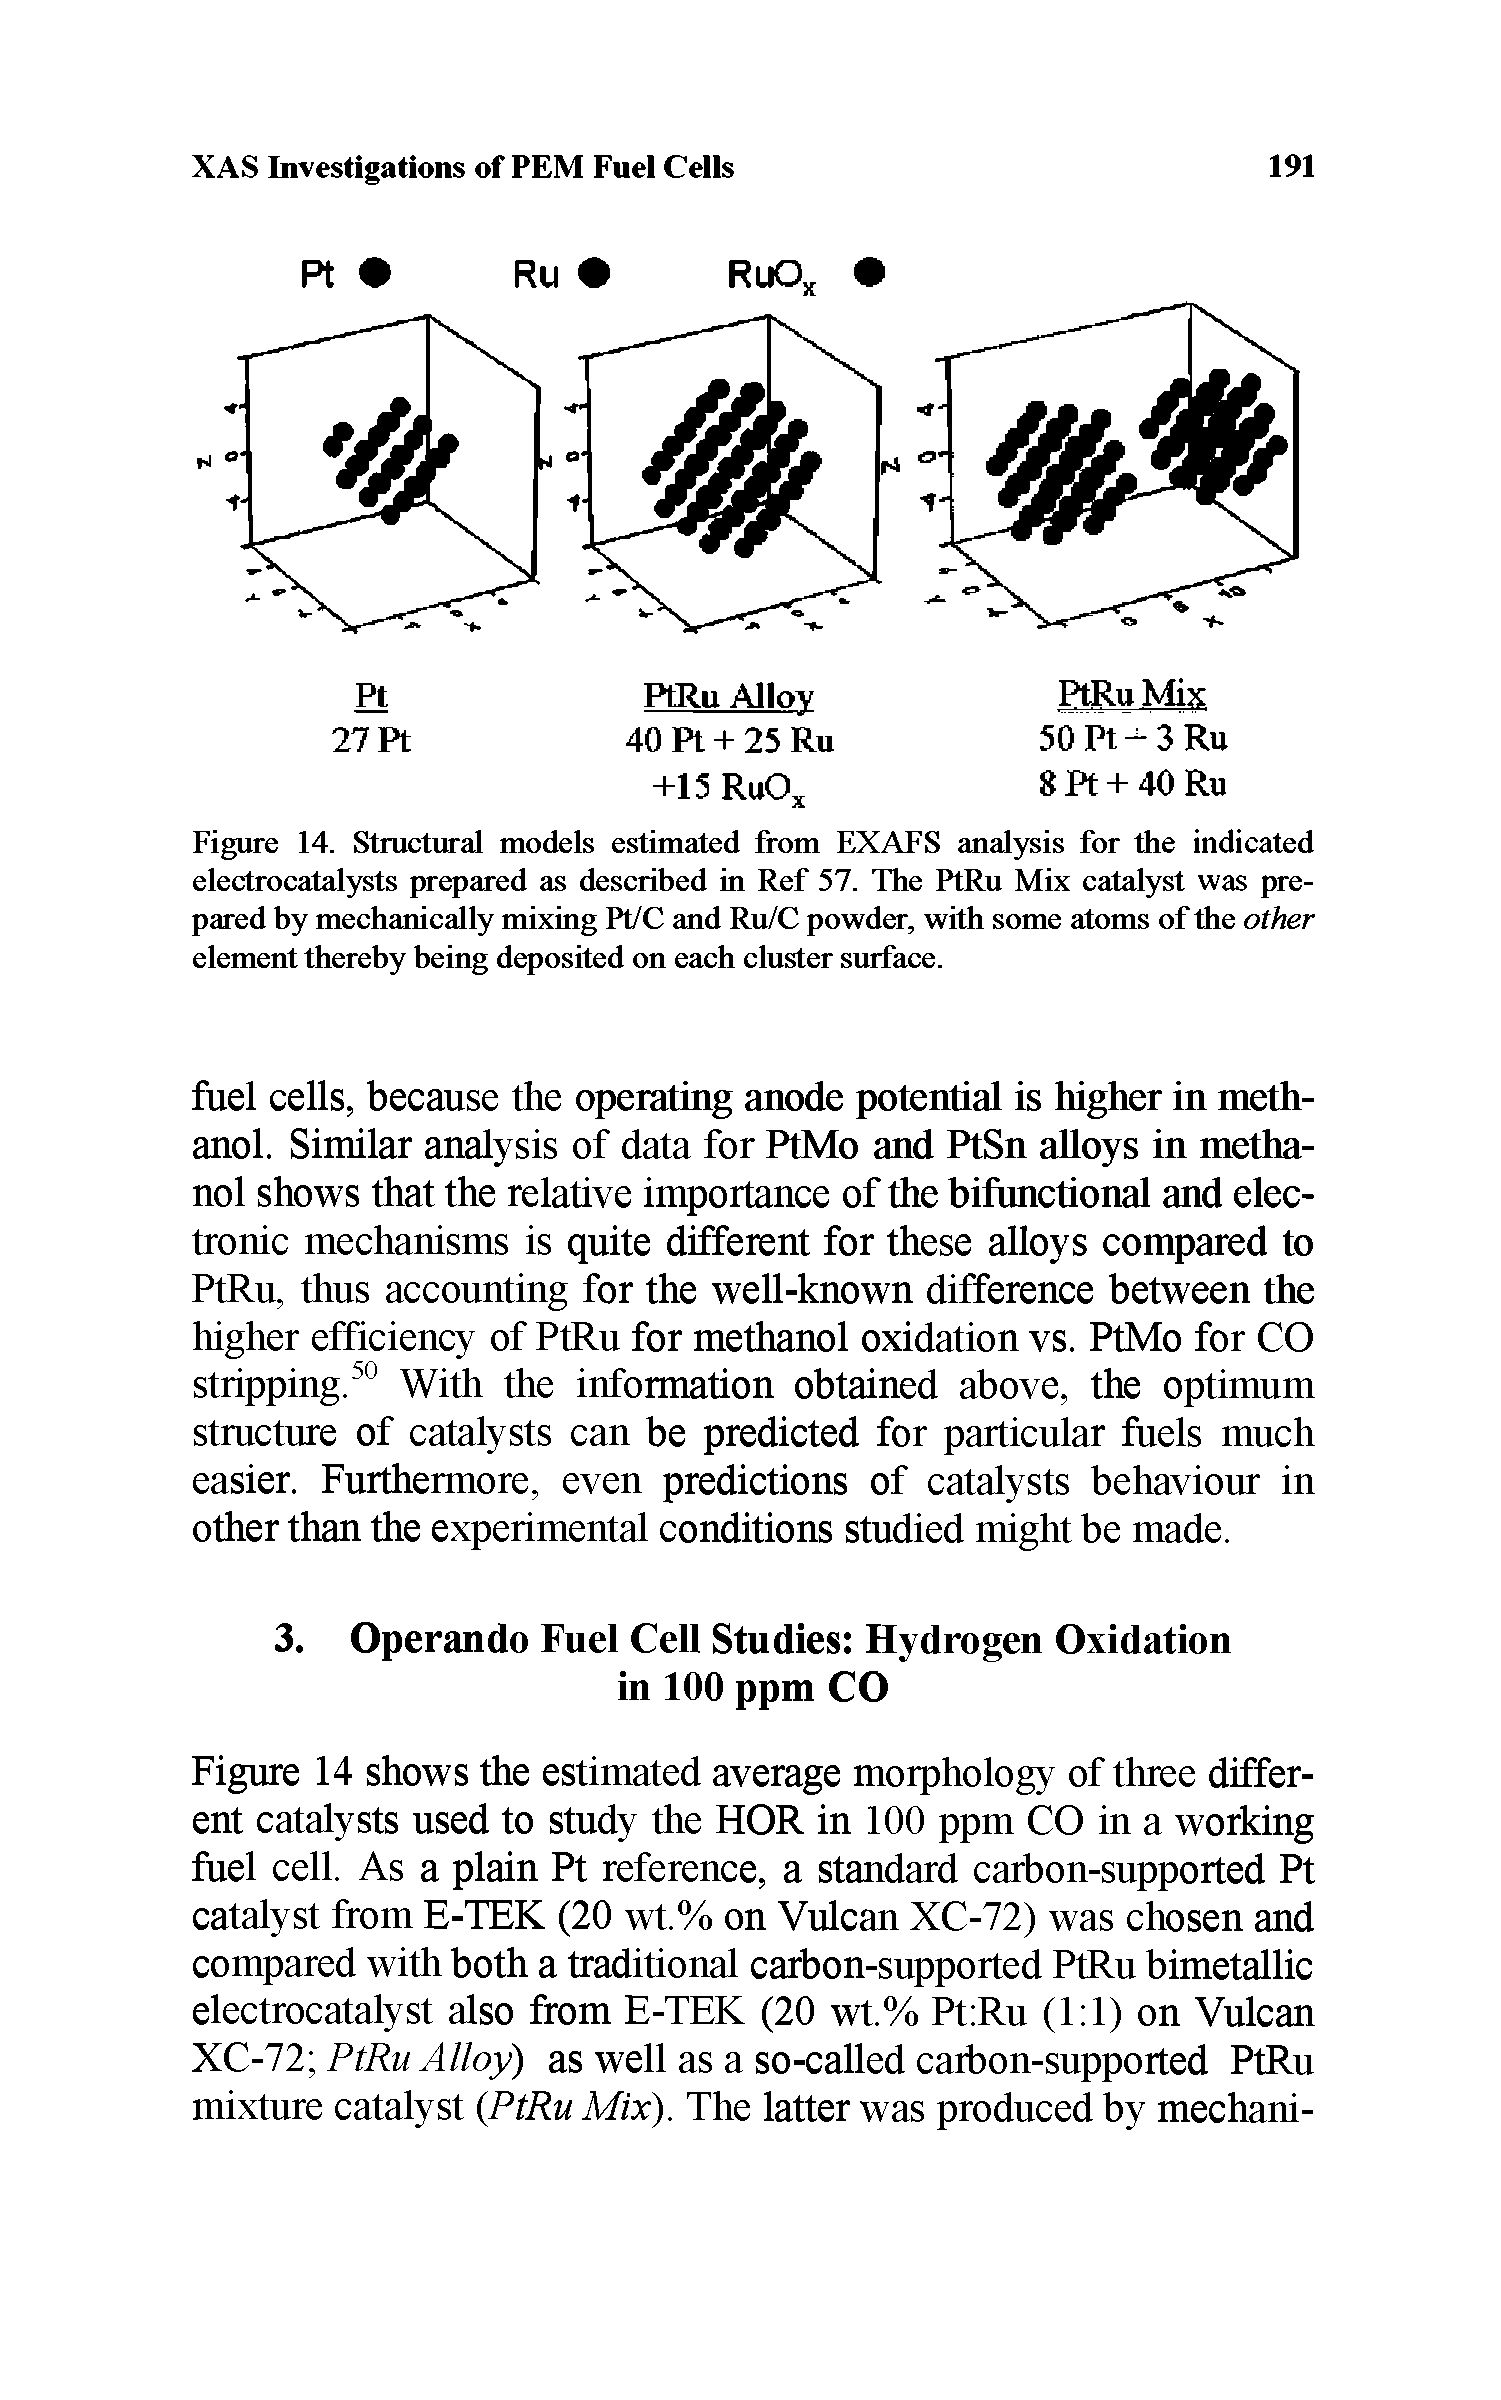 Figure 14. Structural models estimated from EXAFS analysis for the indicated electrocatalysts prepared as deseribed in Ref 57. The PtRu Mix catalyst was prepared by mechanically mixing Pt/C and Ru/C powder, with some atoms of the other element thereby being deposited on each cluster surface.